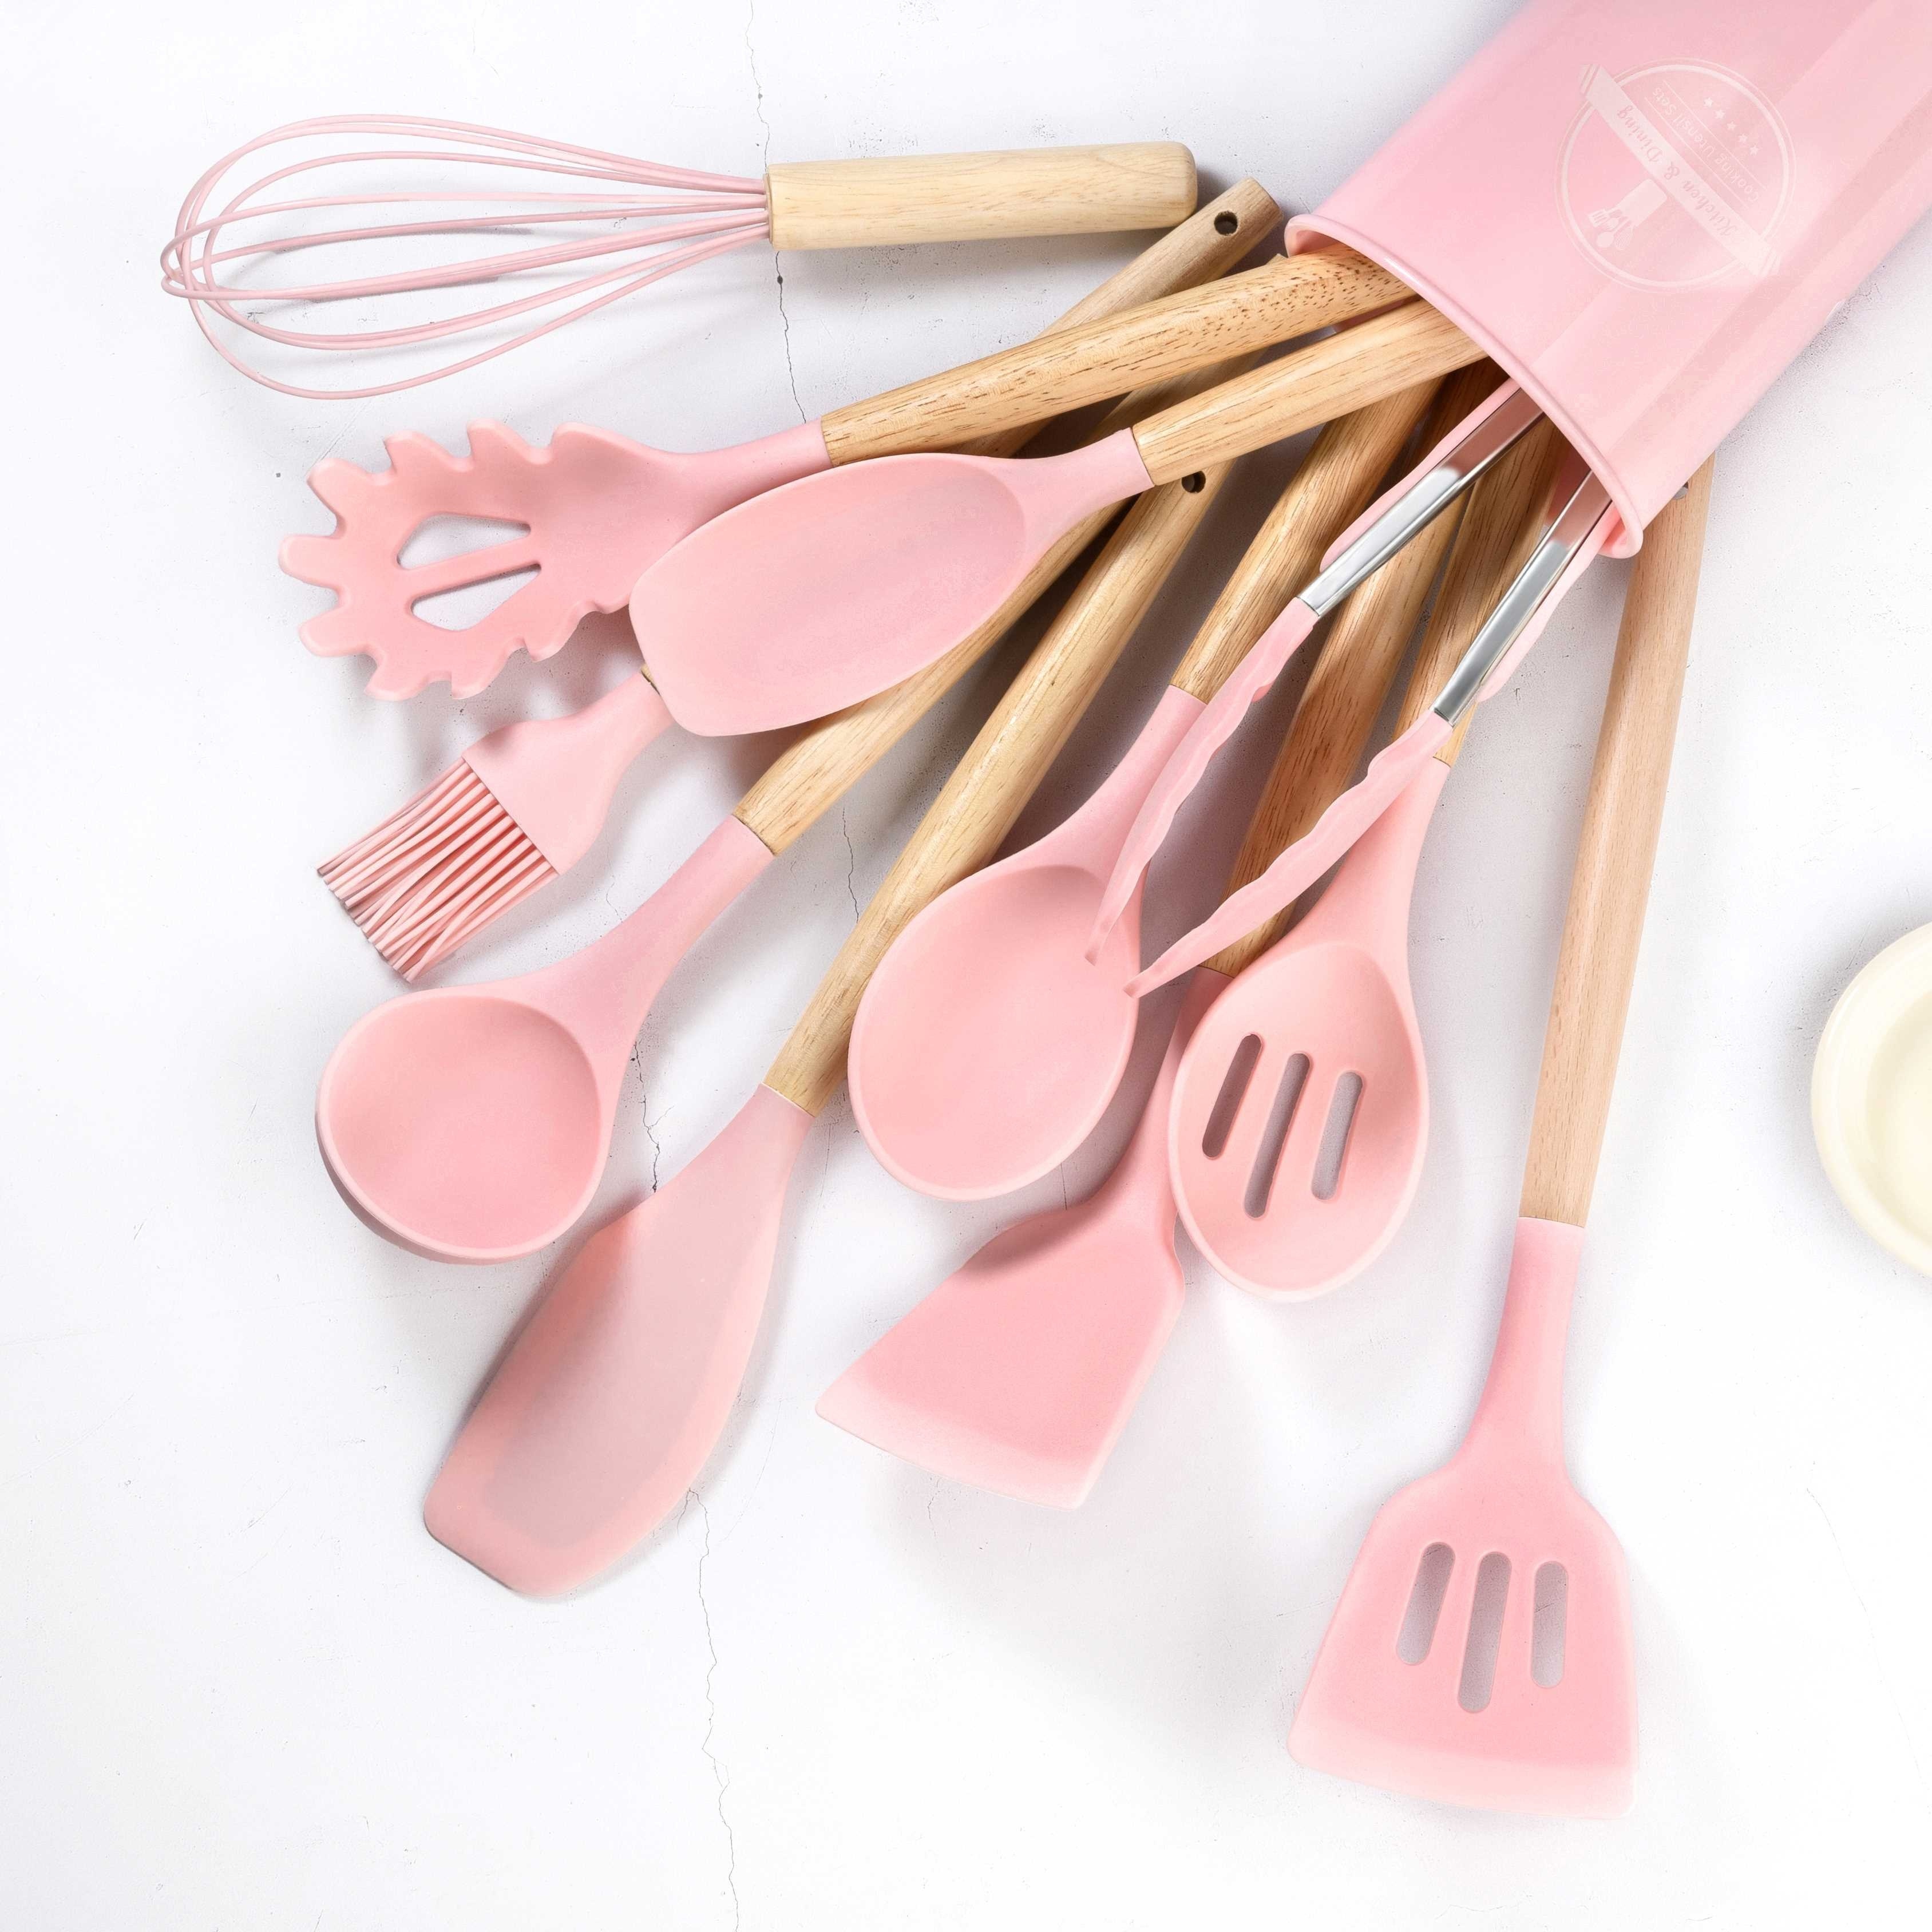 Aoibox 15-Piece Silicon Cooking Utensils Set with Wooden Handles and Holder  for Non-Stick Cookware, Pink SNPH002IN469 - The Home Depot